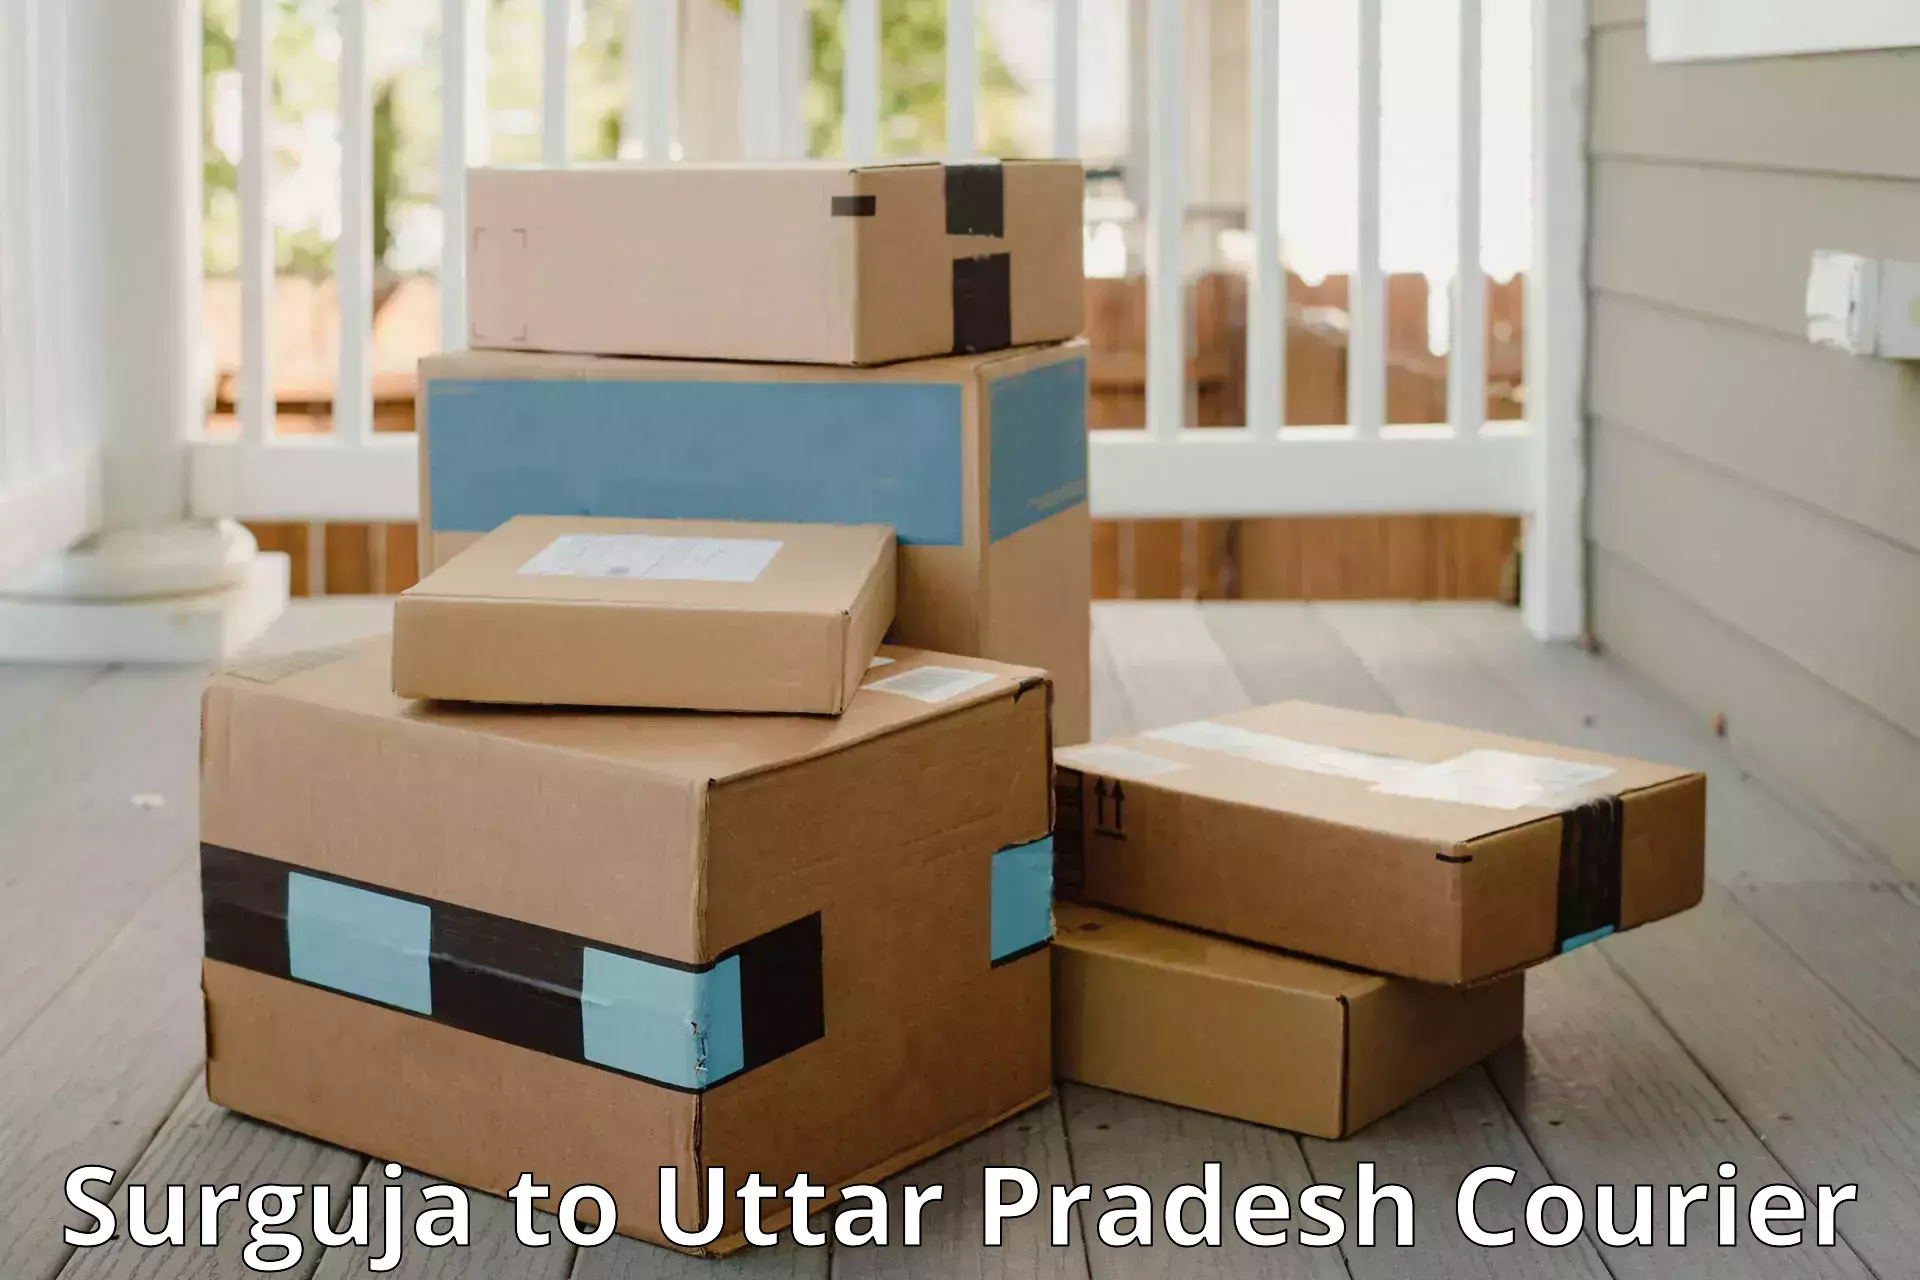 Online luggage shipping Surguja to Sultanpur